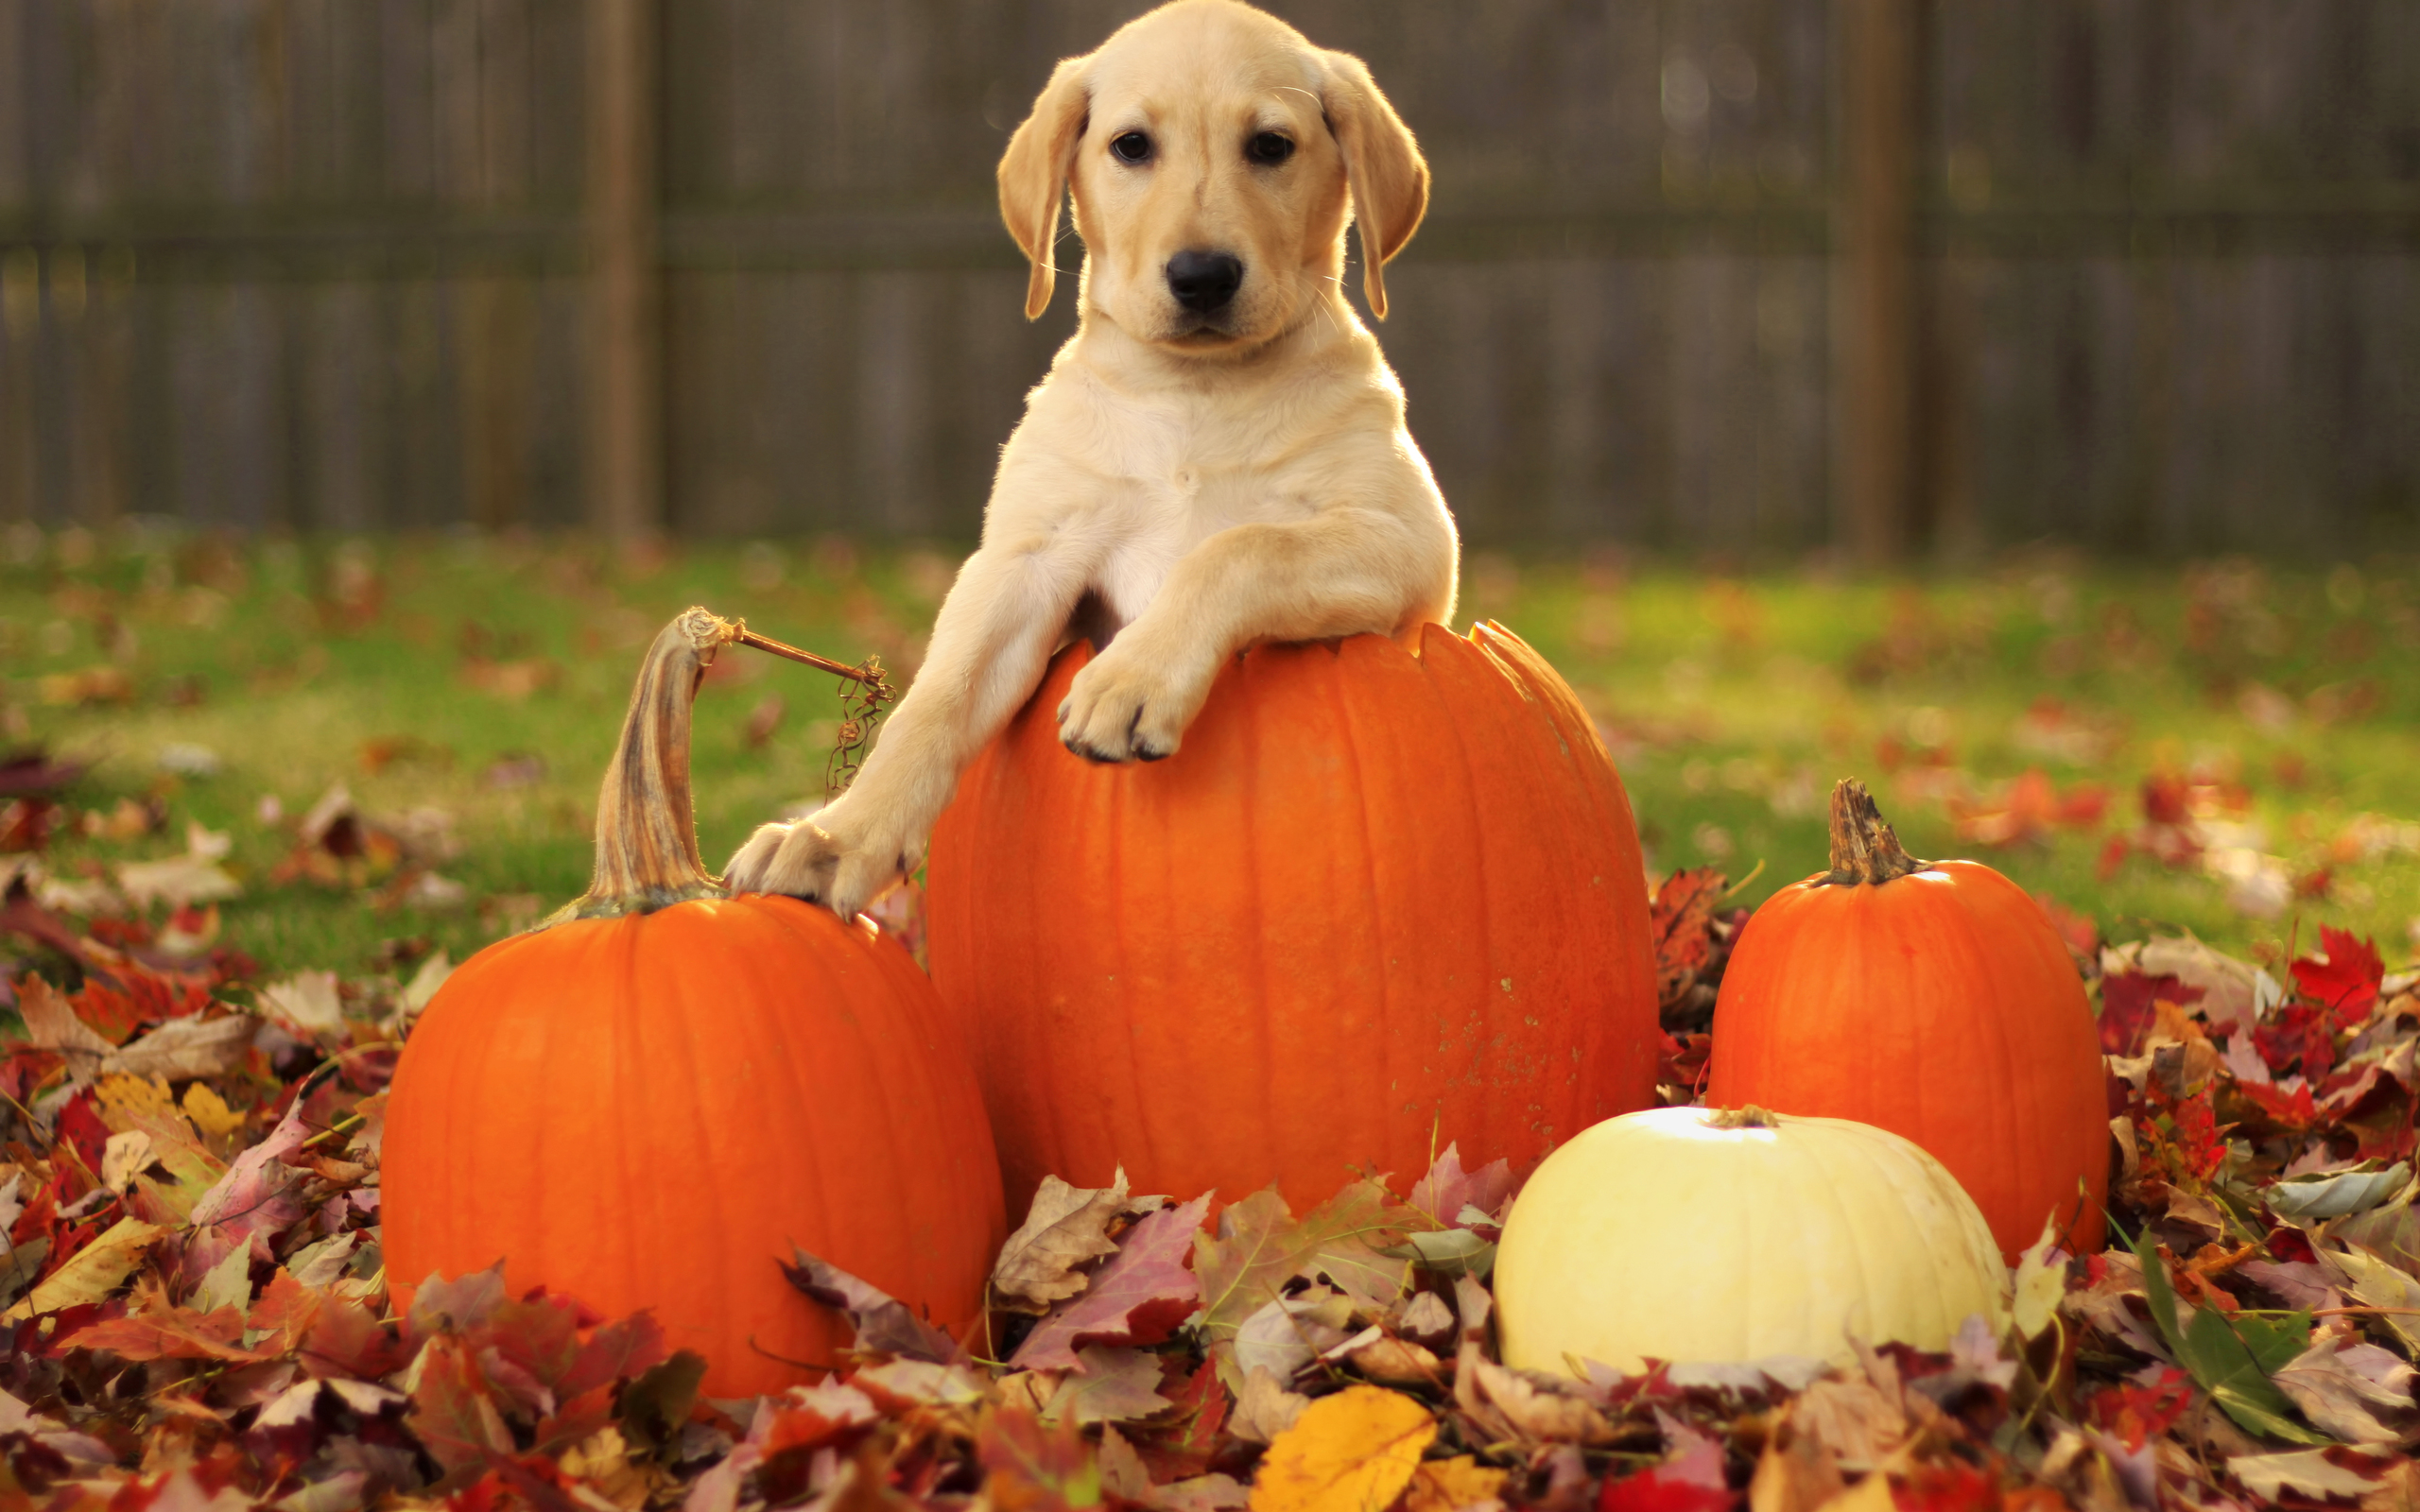 Autumn Wallpaper A Pumpkin And Dog Is Great For